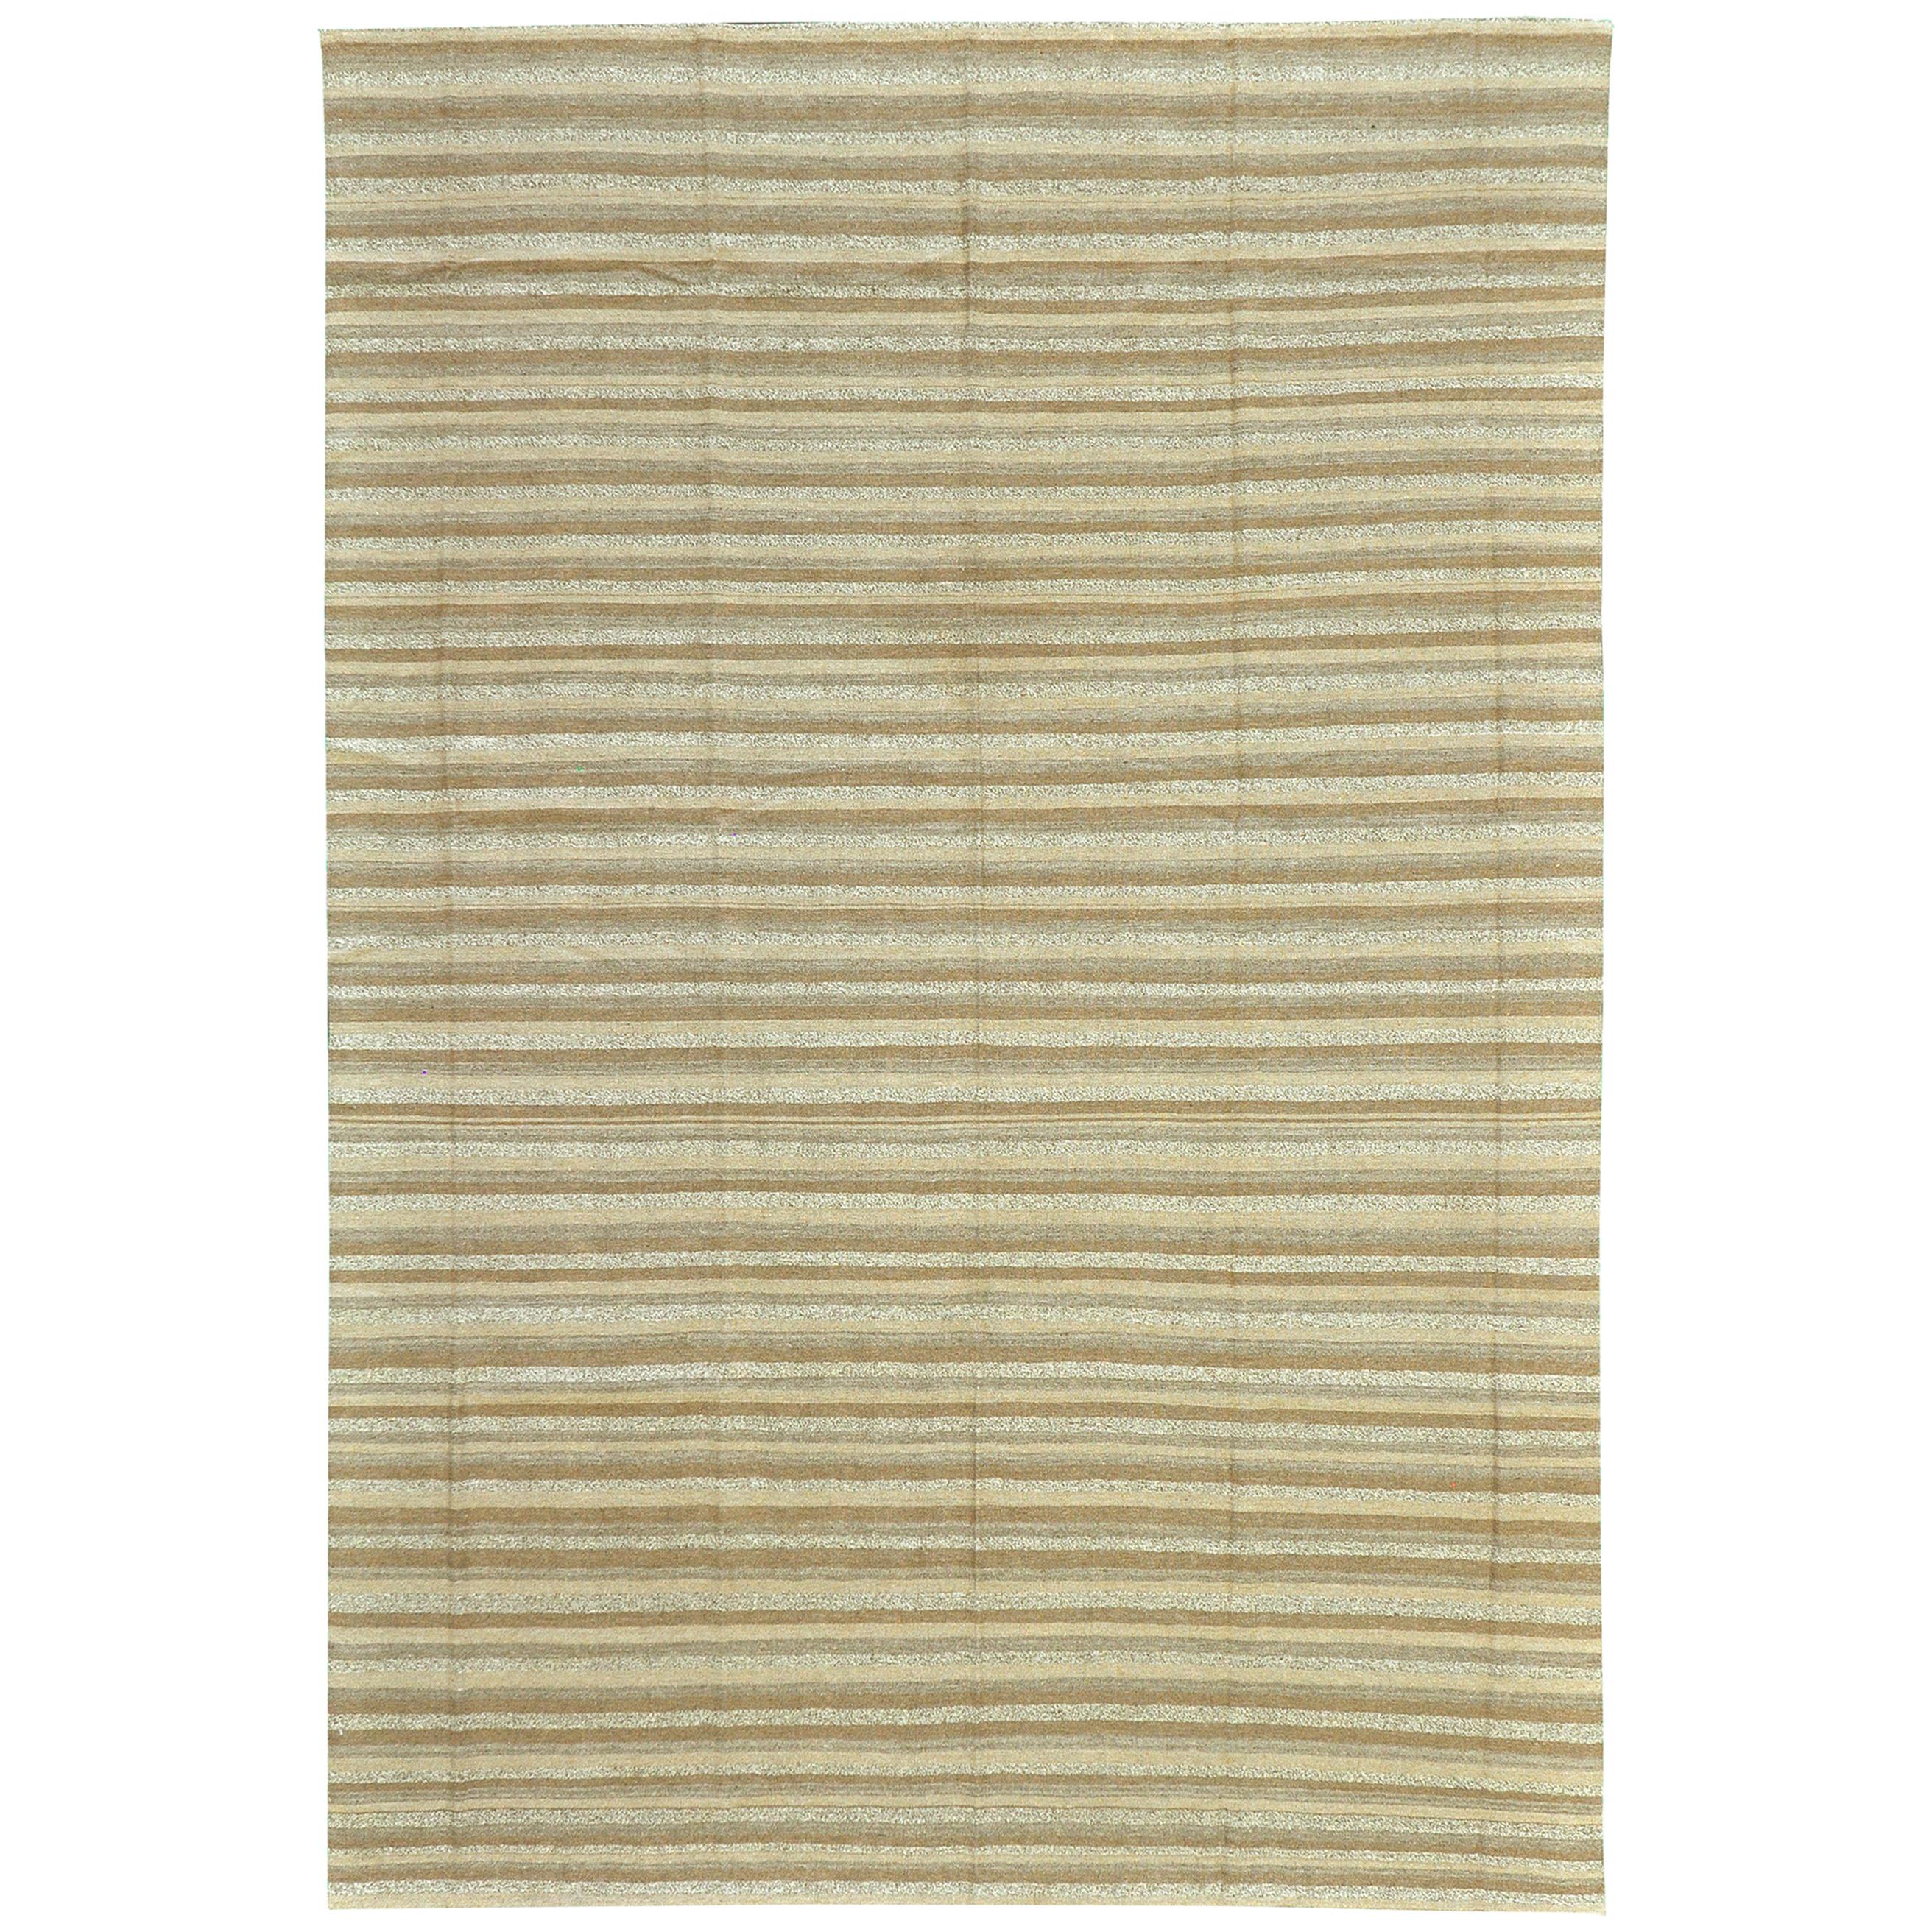 Natural Dye Flat-Weave Kilim Puro Collection For Sale